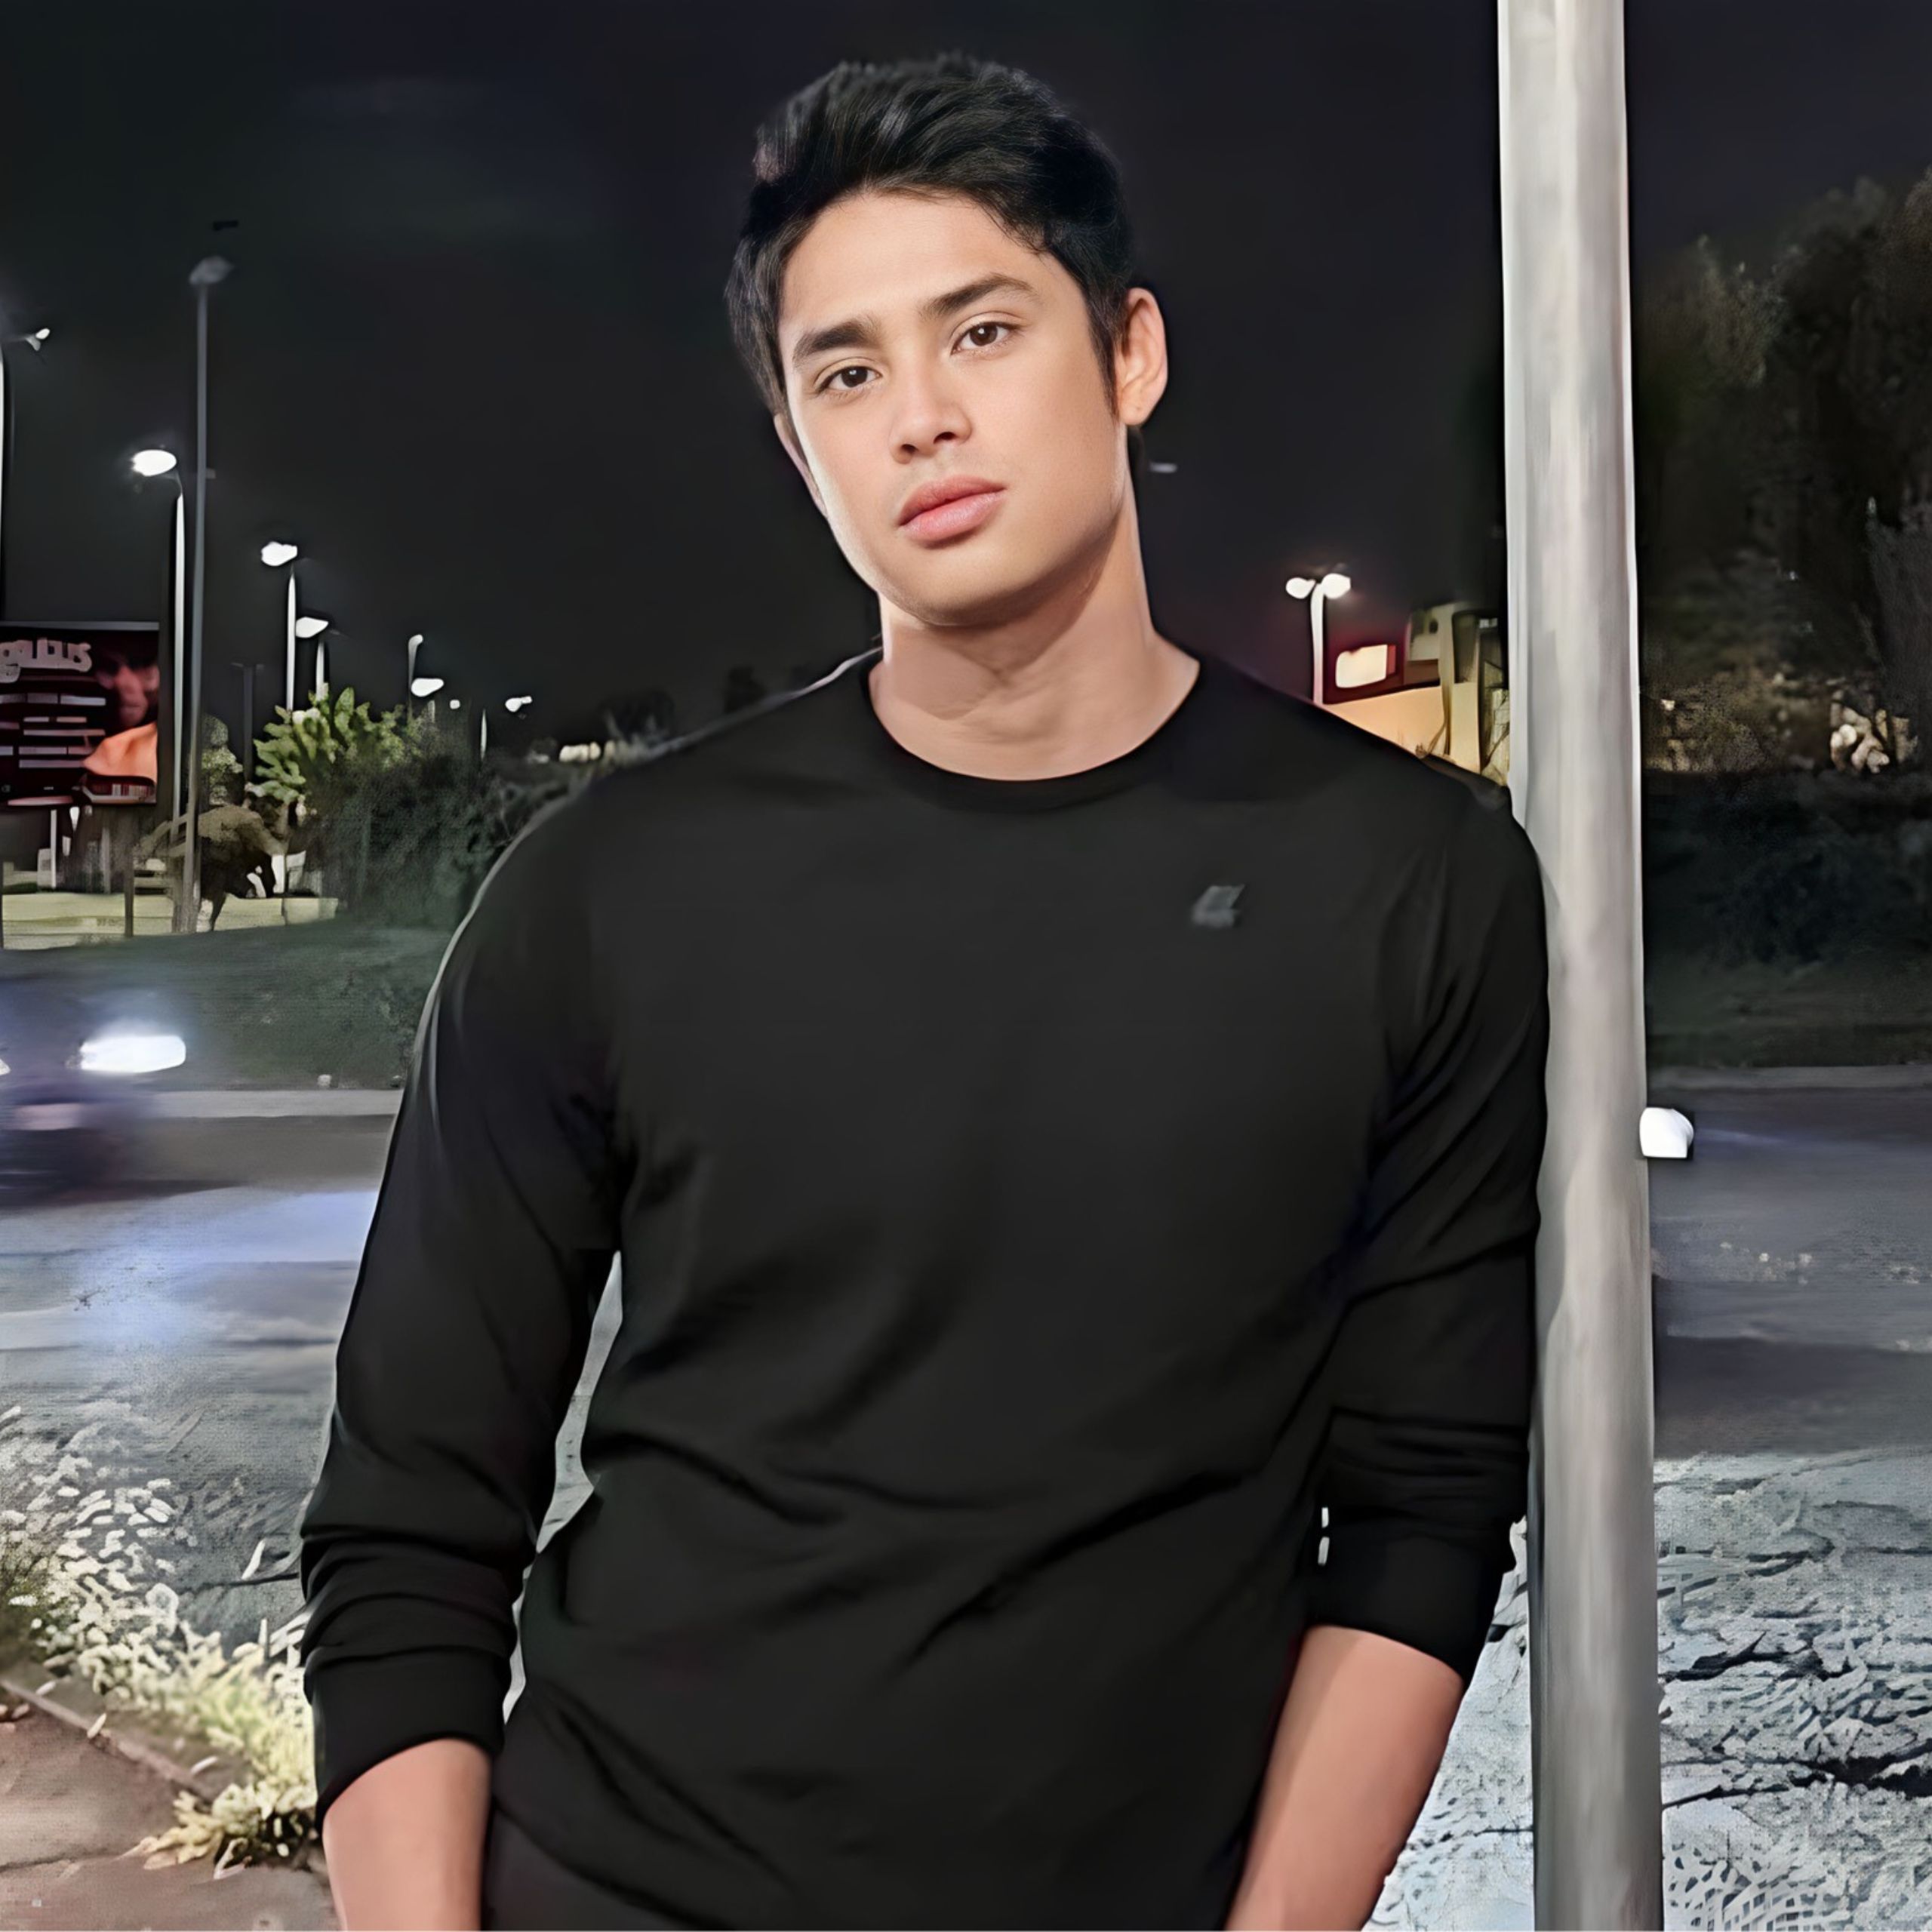 How Donny Pangilinan Conquered Italy With an All-Black Wardrobe